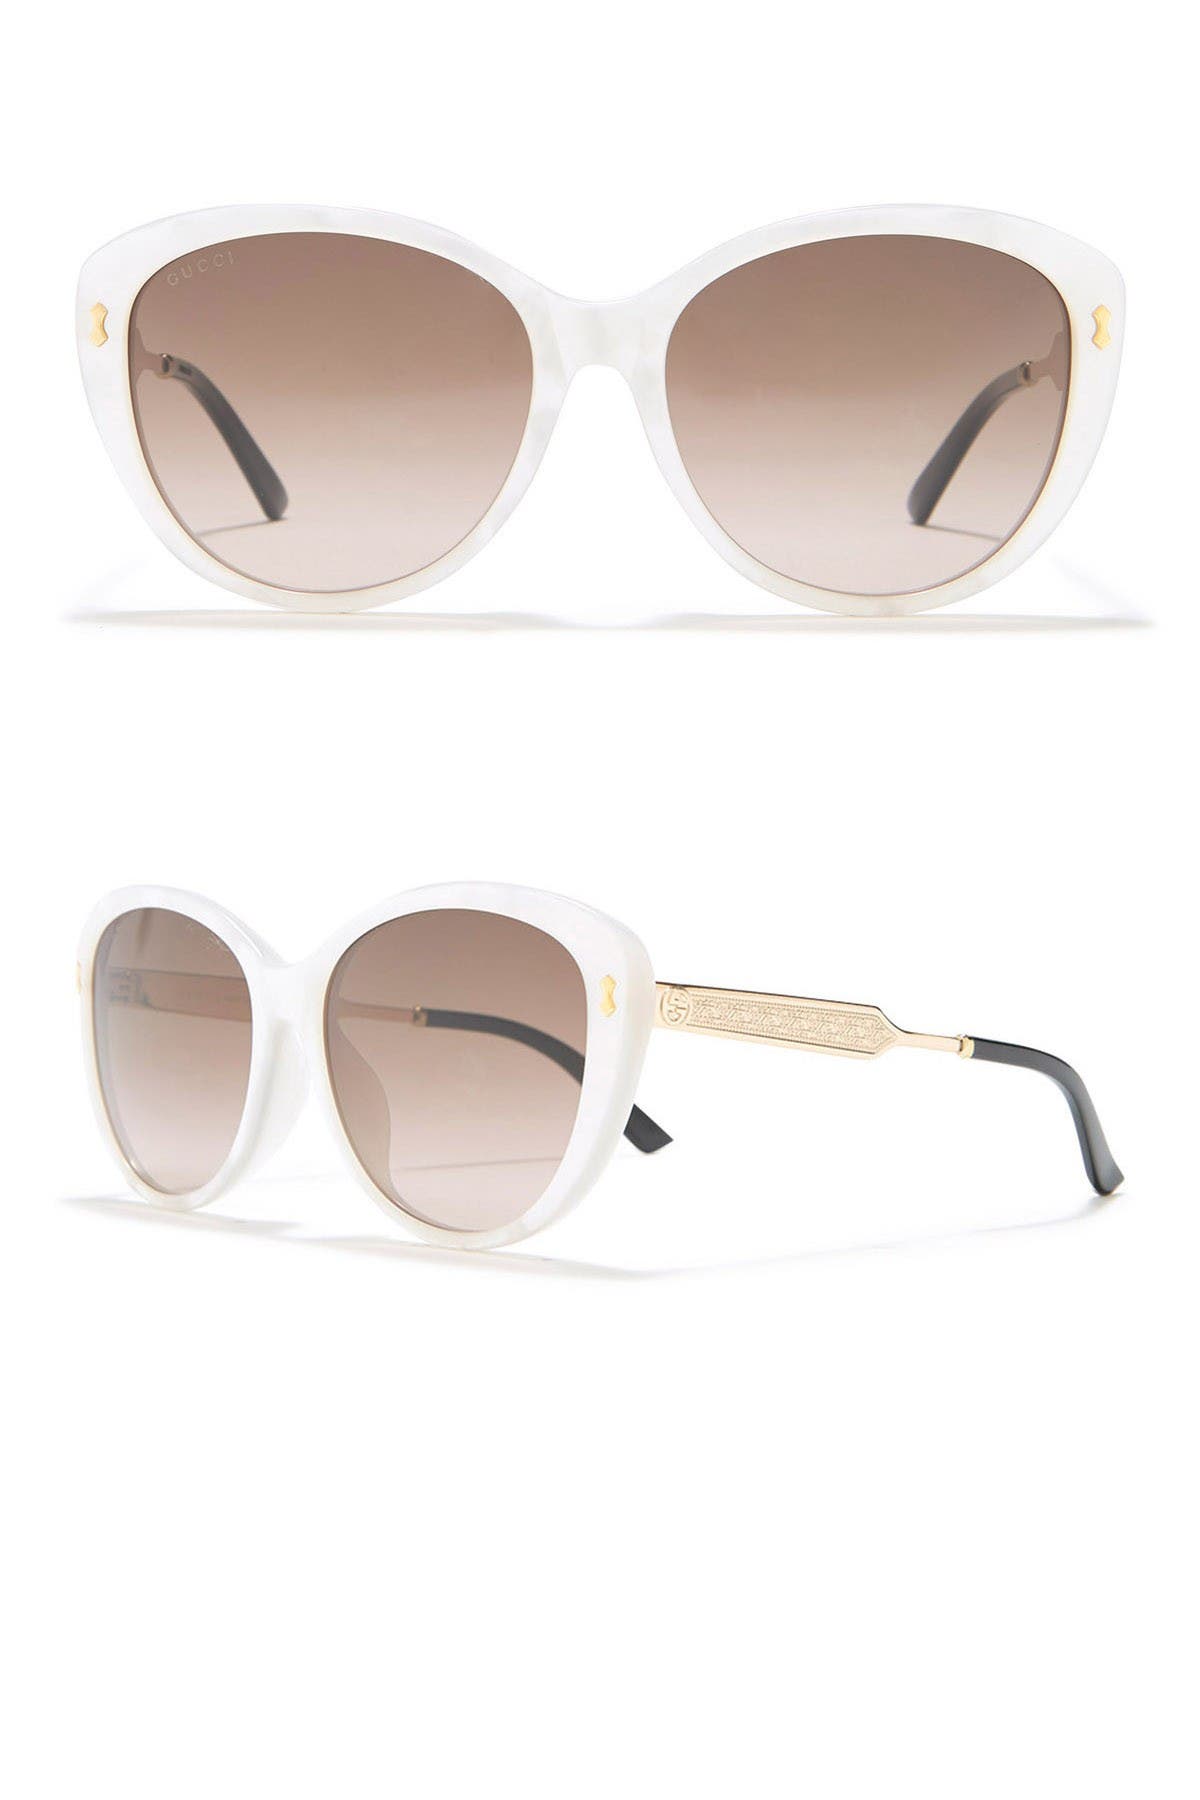 gucci cat eye sunglasses mother of pearl